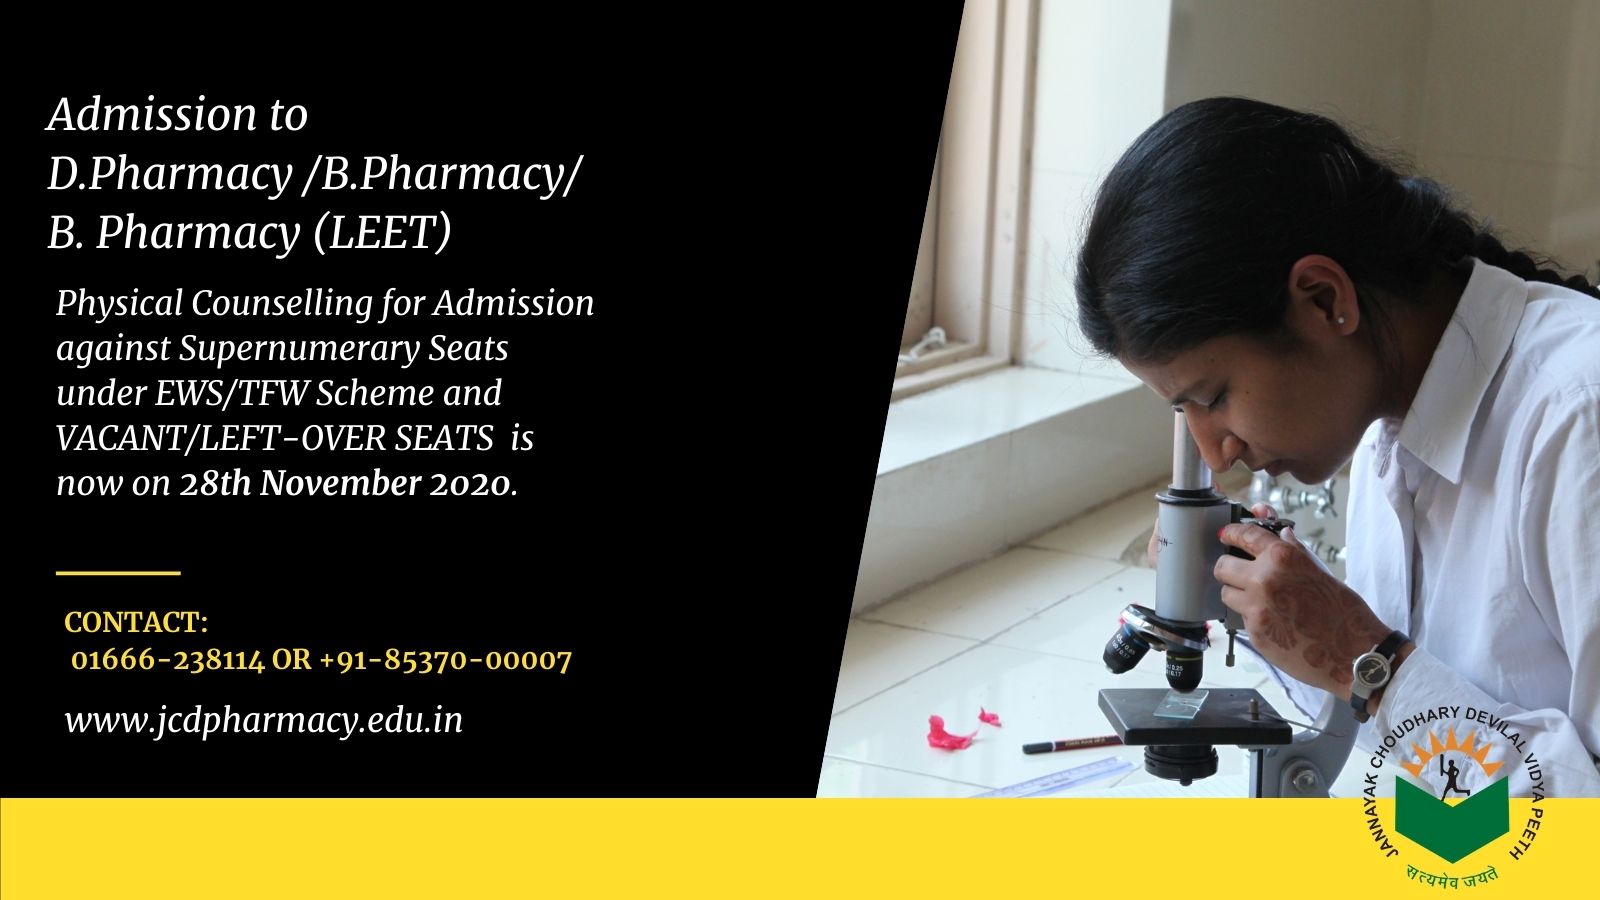 Physical Counselling for Admission against Supernumerary Seats is now 28th November 2020.